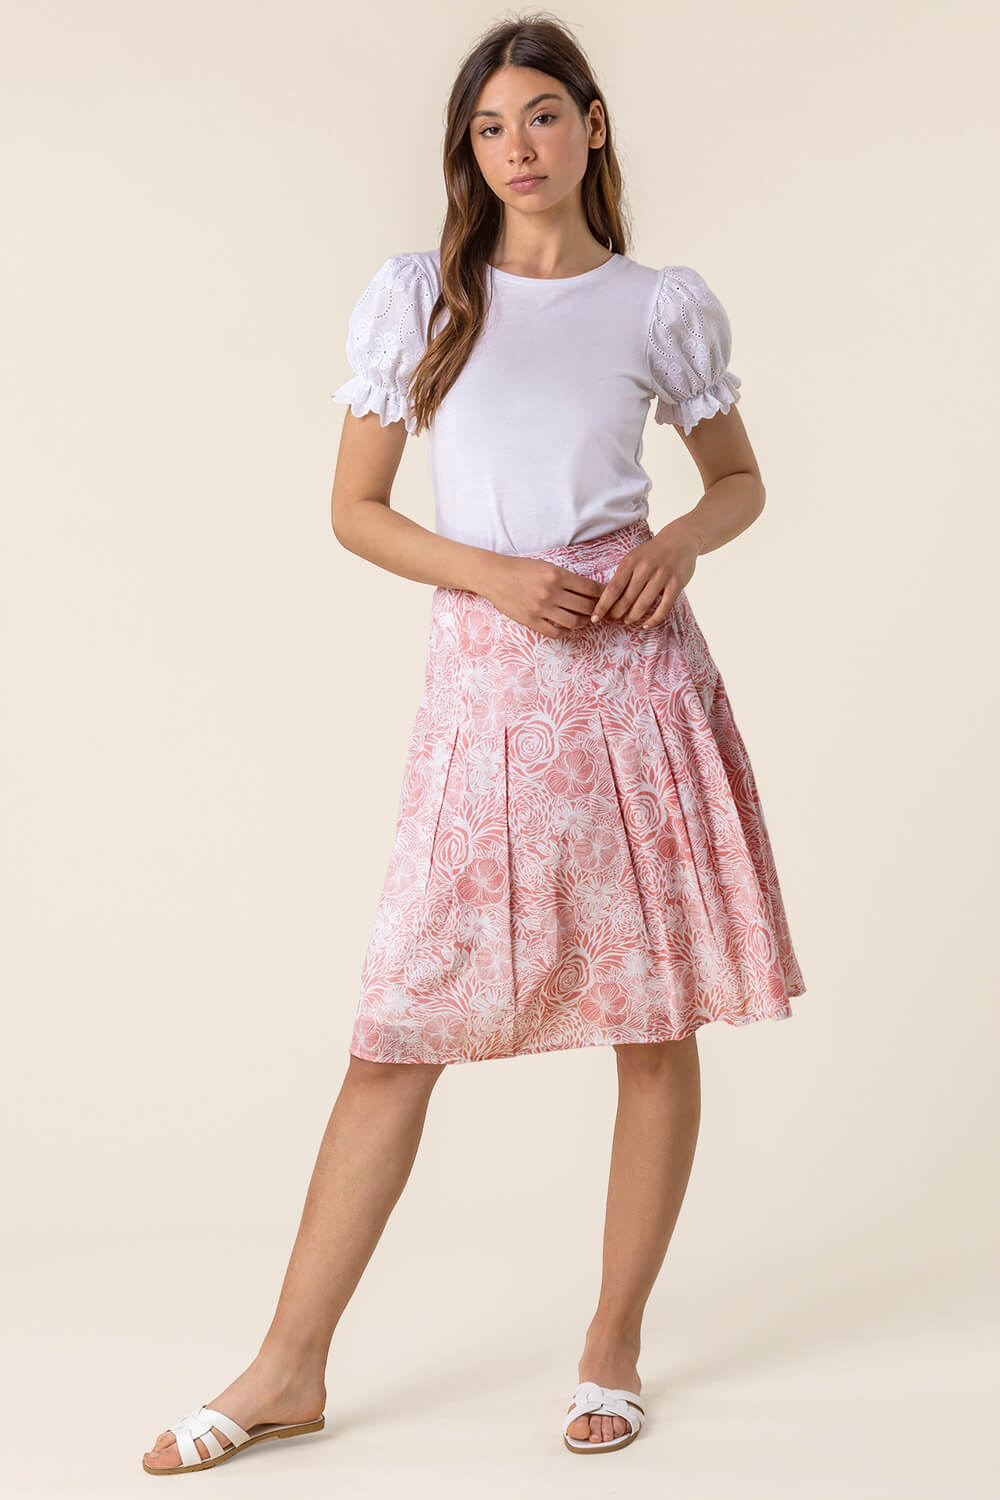 PINK Floral Print A-Line Cotton Skirt, Image 4 of 4